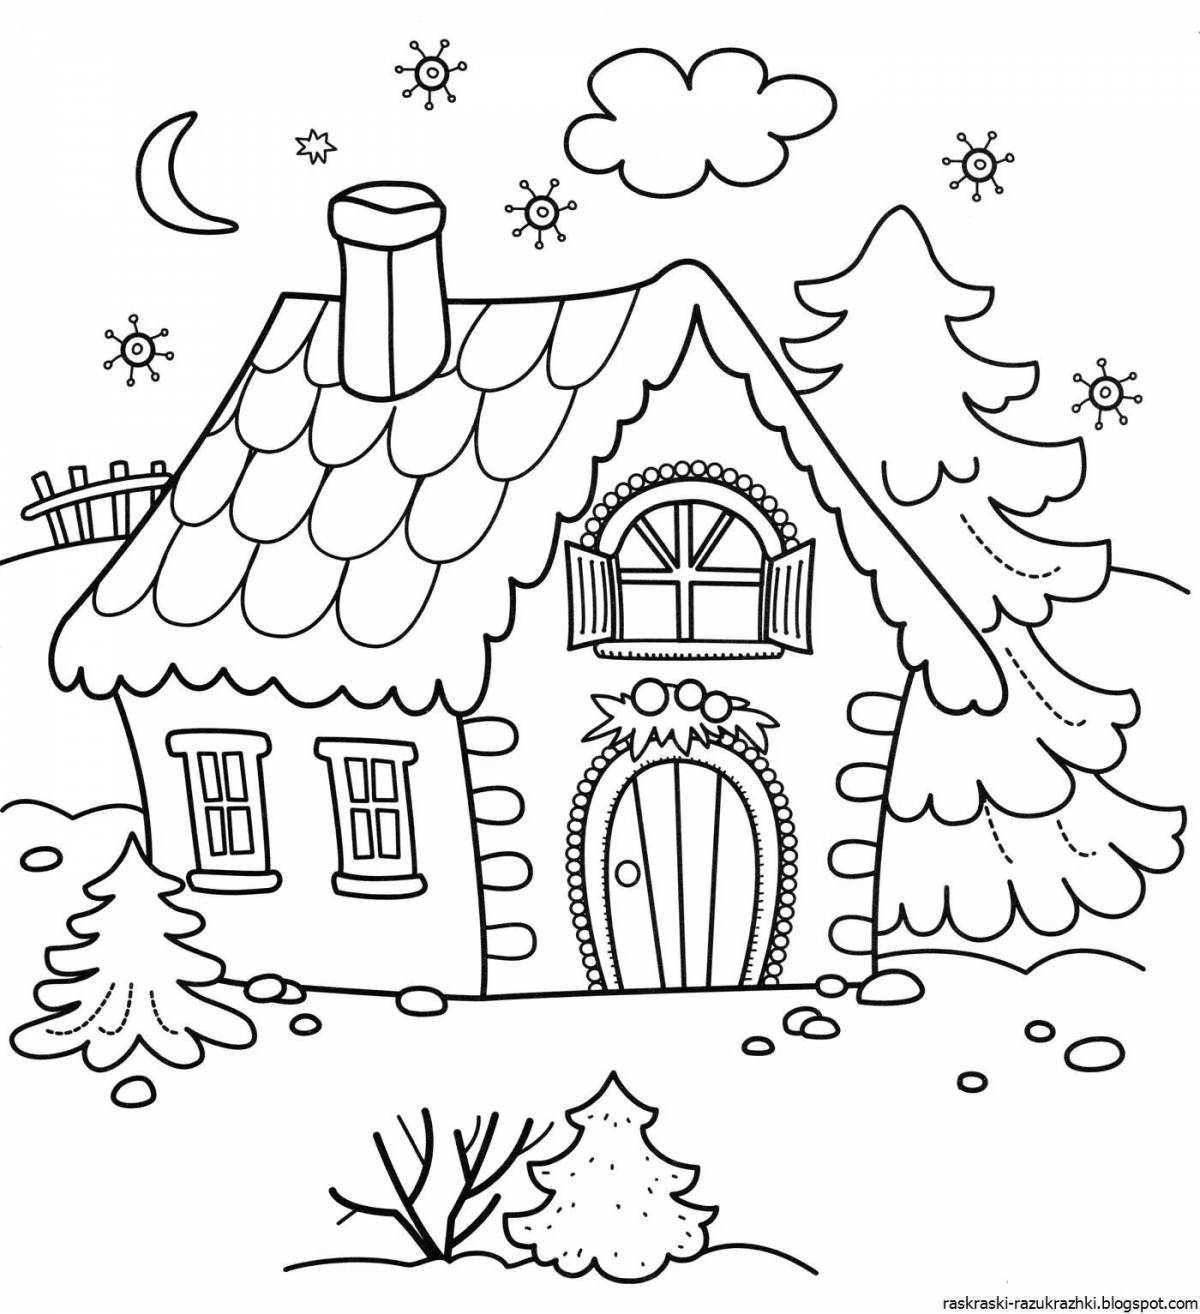 Colouring a beautiful house for children 4-5 years old